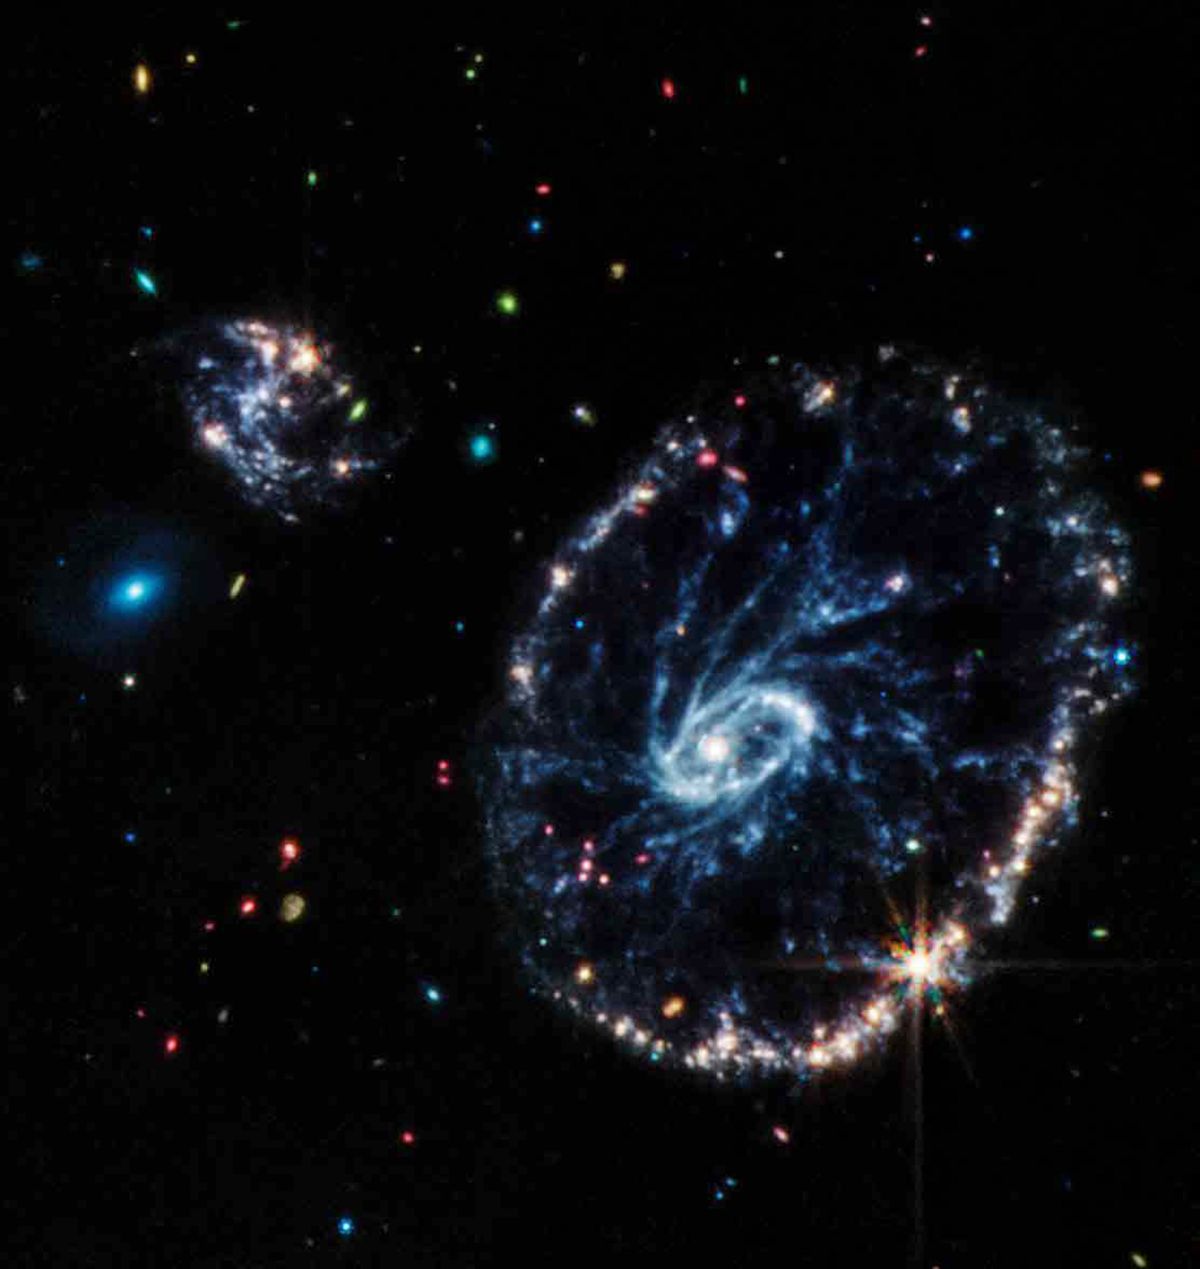 In an undated image provided by NASA, ESA, CSA, STScI, and Webb ERO Production Team, the Cartwheel galaxy seen by the James Webb Space Telescope. The MIRI instrument on the Webb telescope was used to reveal the galaxy’s dusty regions and young stars. (NASA, ESA, CSA, STScI, and Webb ERO Production via The New York Times) – FOR EDITORIAL USE ONLY. --  (NASA ESA CSA STSCI AND WEBB ERO PRODUCTION)